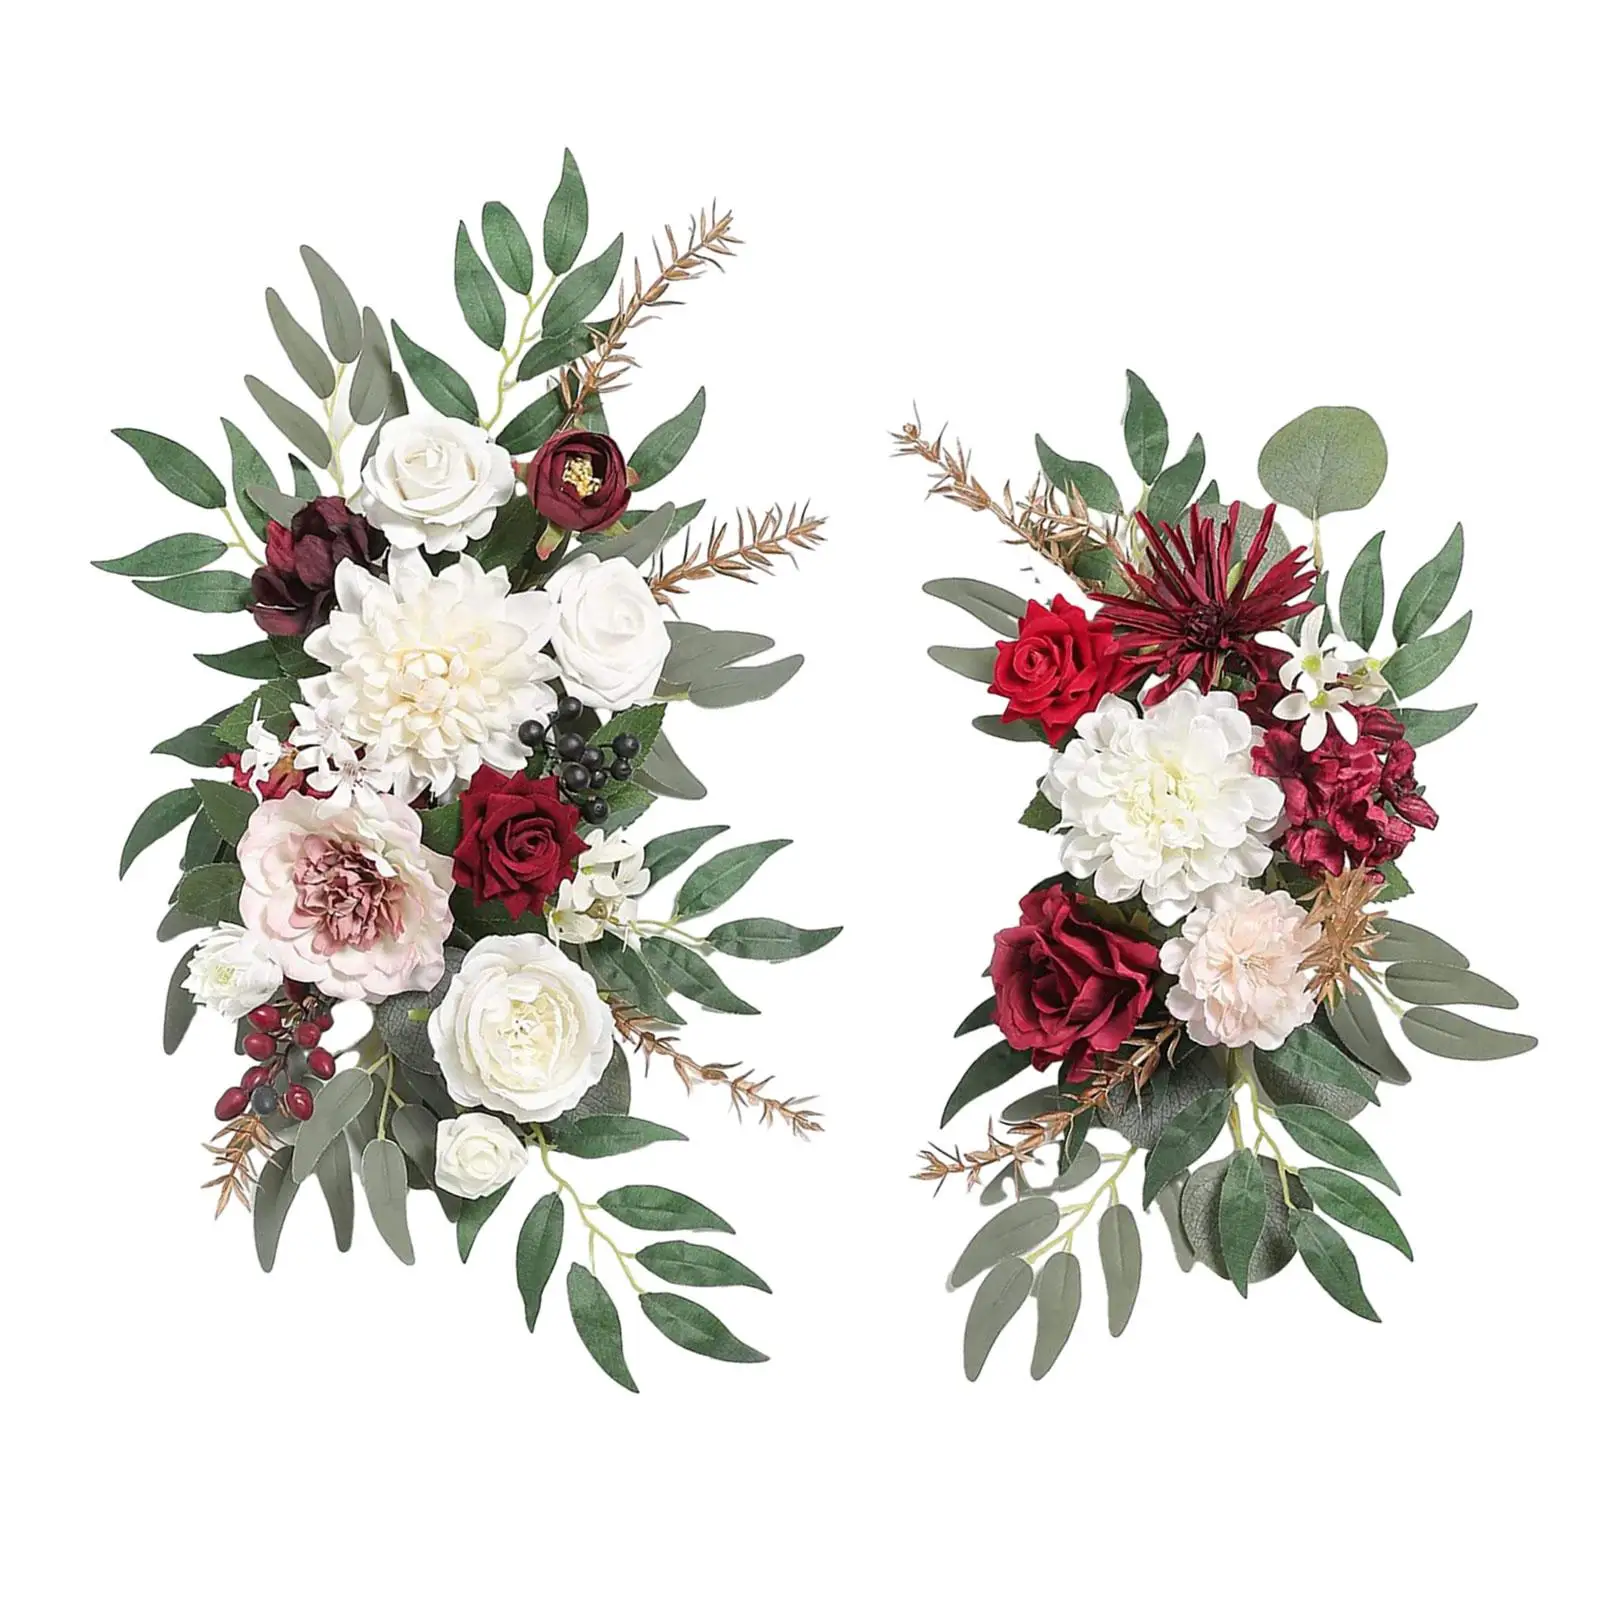 2 Pieces Wedding Arch Wreath Floral Swag Backdrop Handmade Hanging Silk Flowers for Front Door Decoration Ceremony Ornament Wall